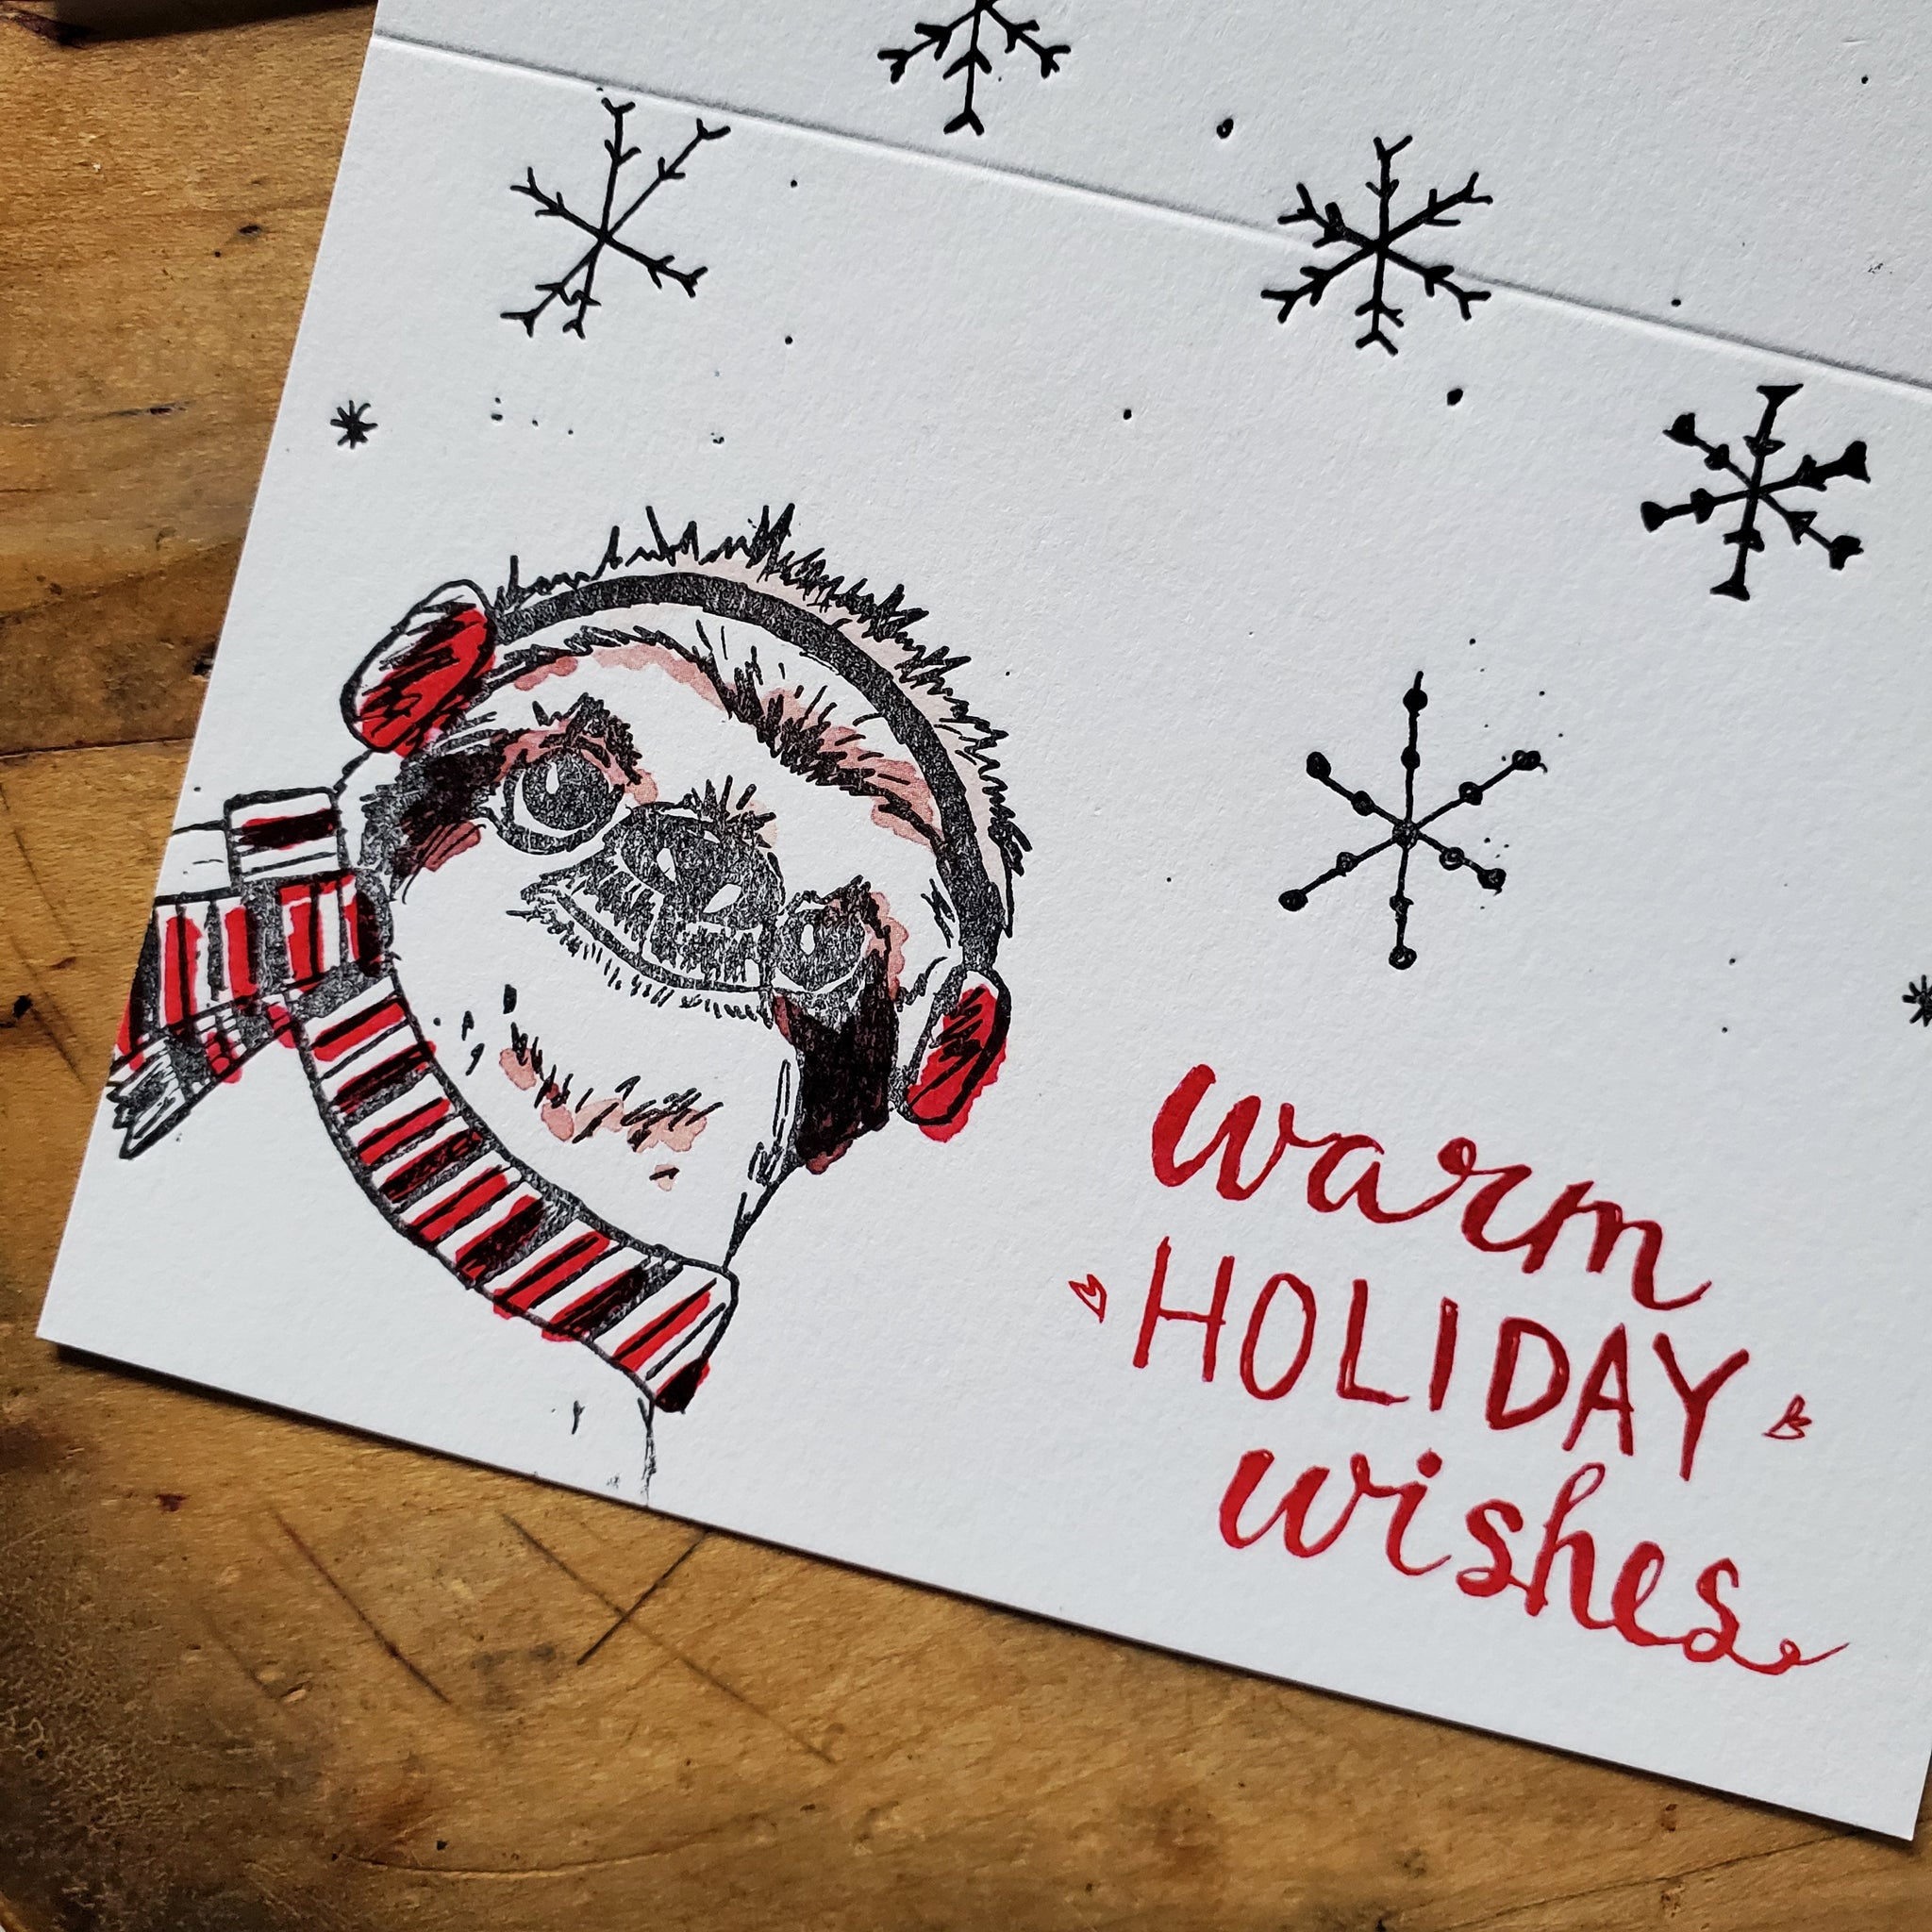 Warm Holiday Wishes Sloth, letterpress printed, eco friendly